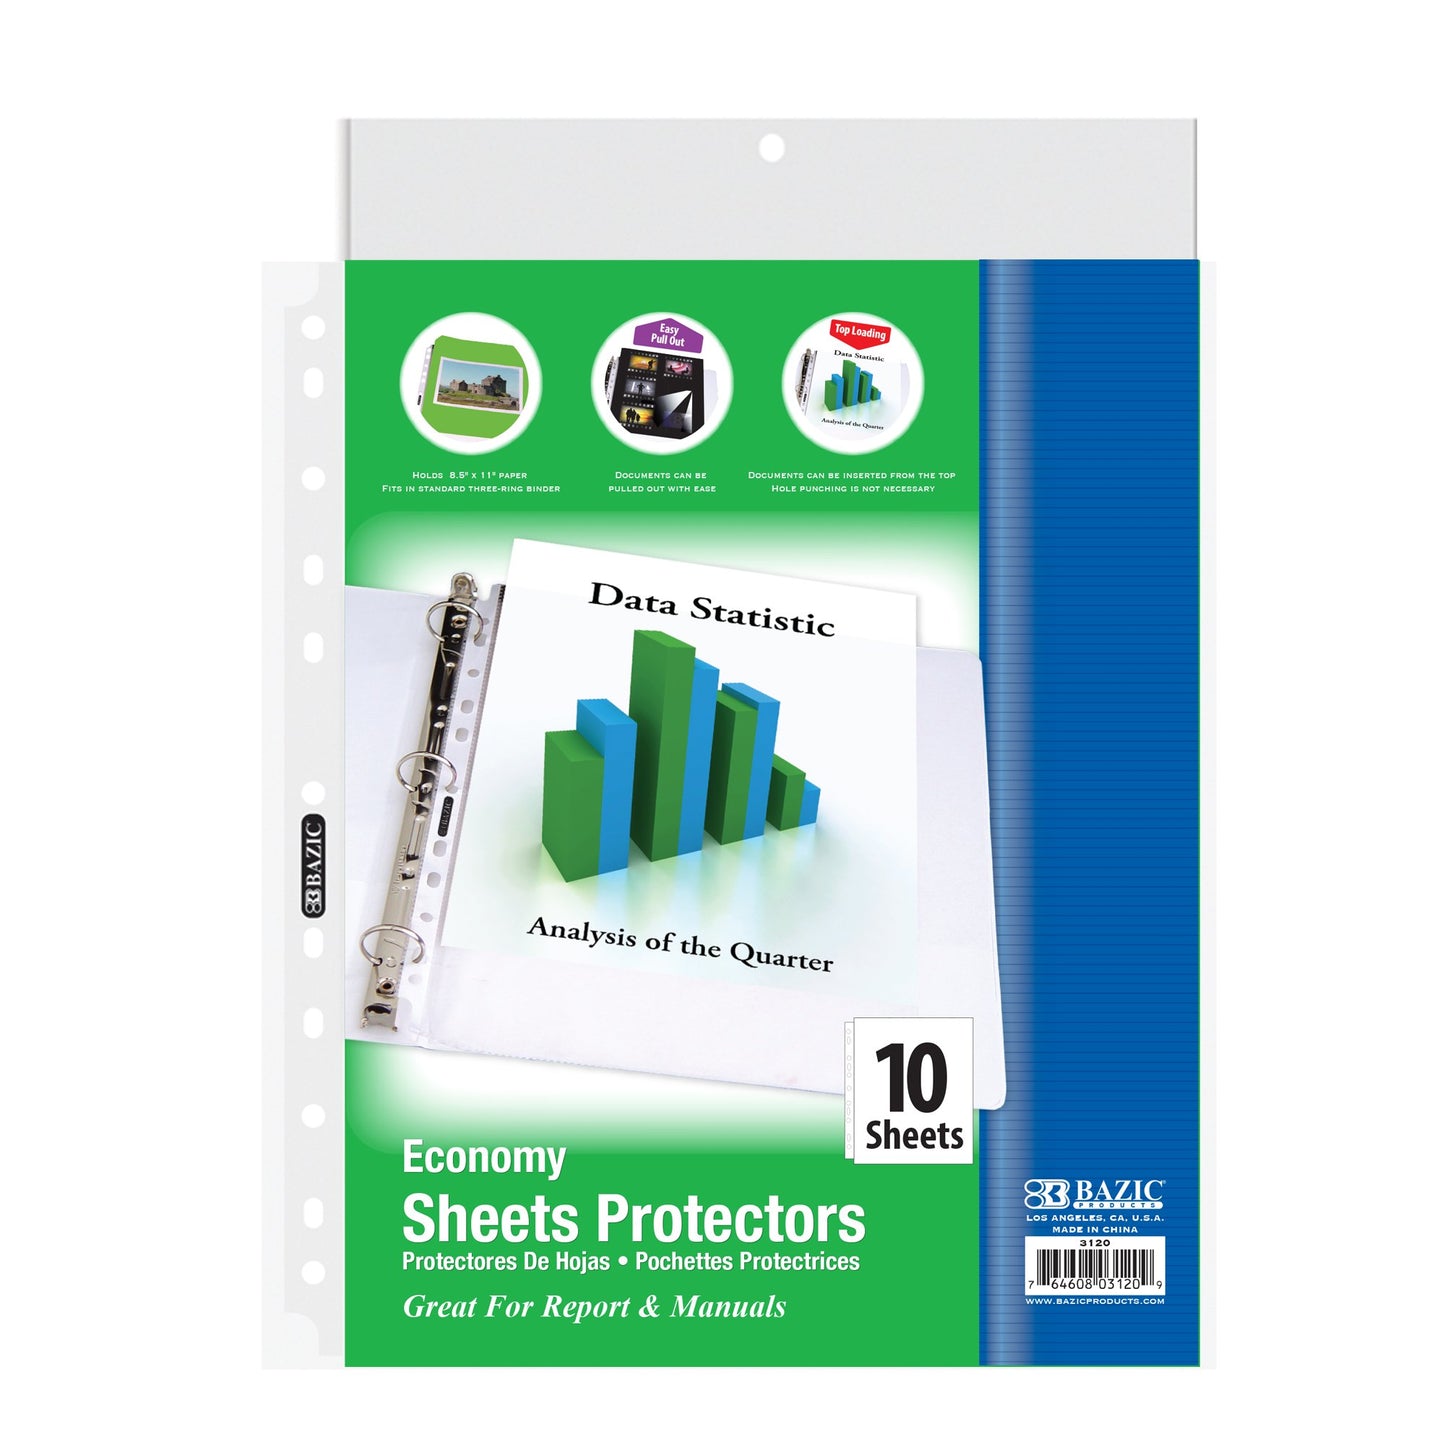 Top Loading Sheet Protectors Holds 8. 5" x 11" paper fits in standard three-ring binder (10/Pack)